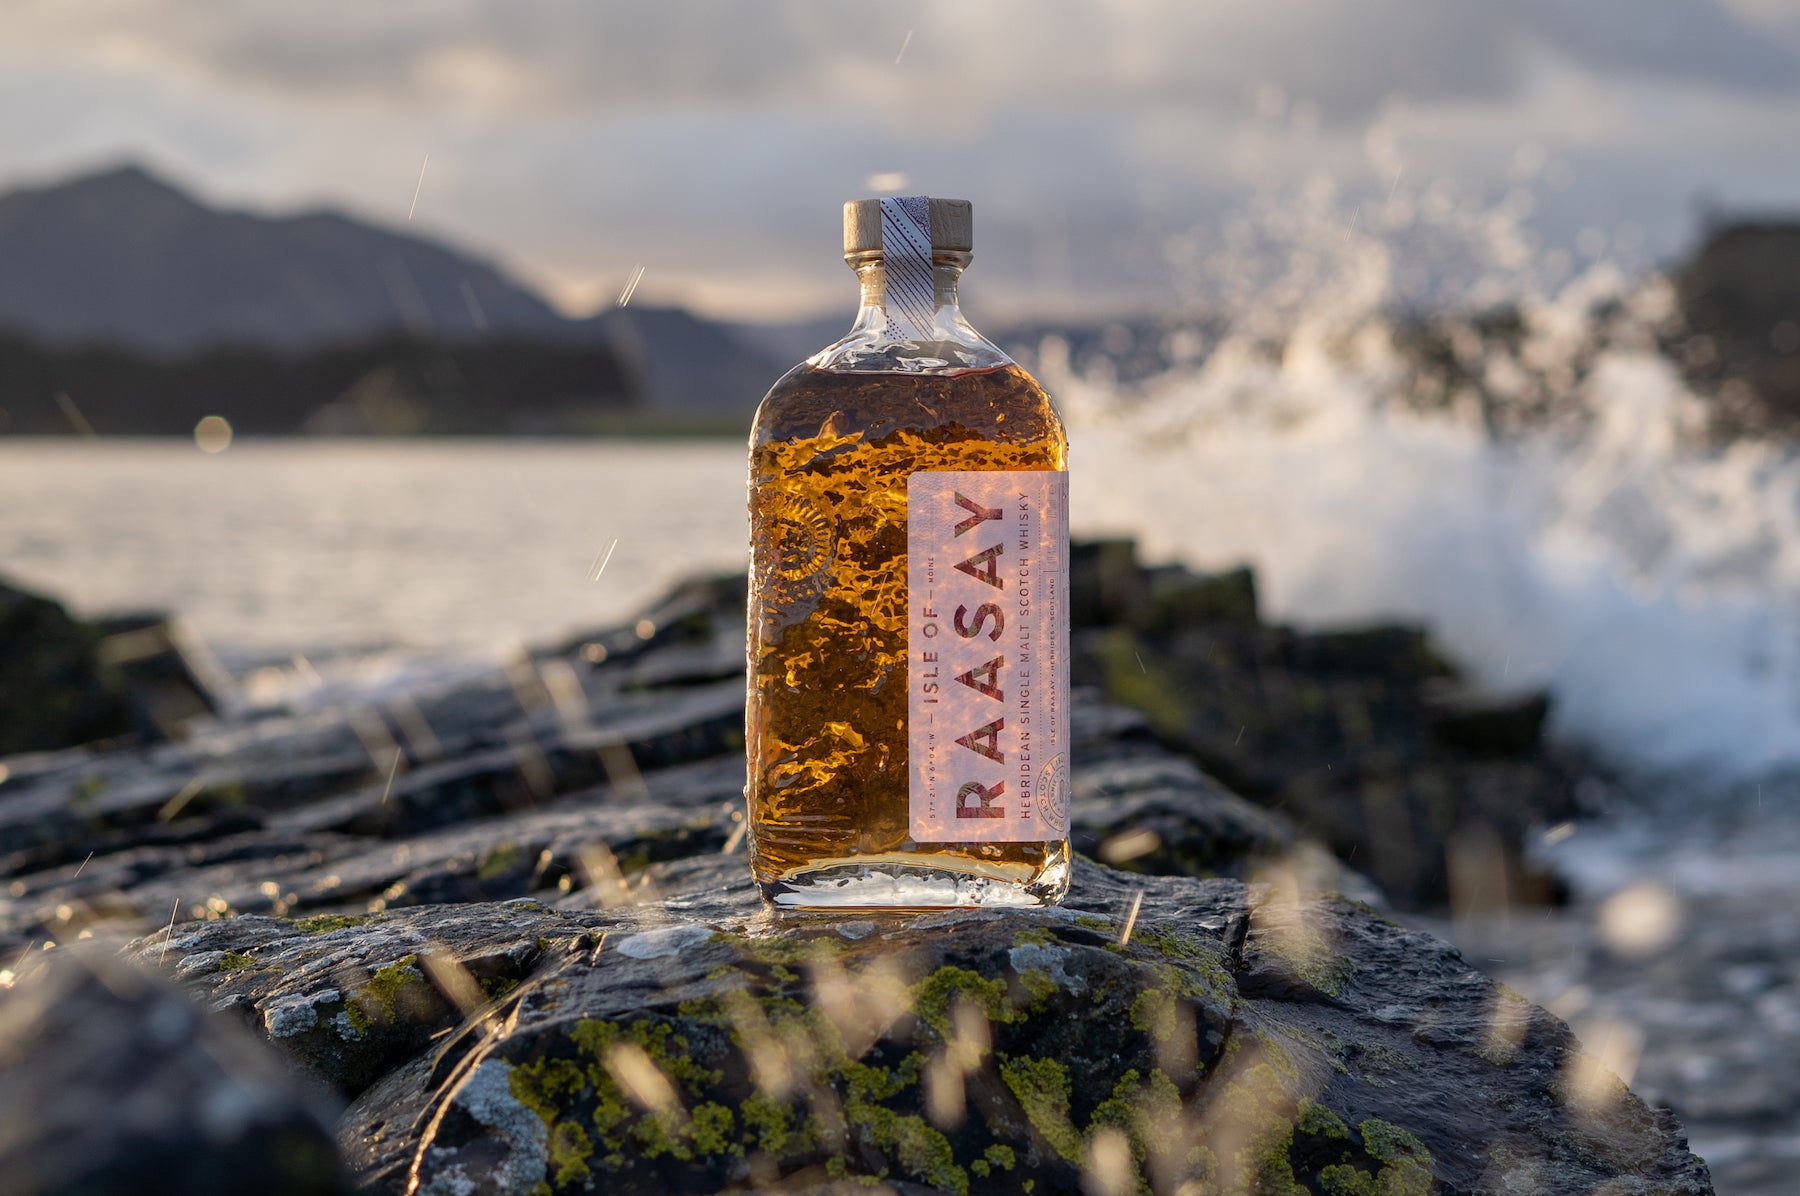 Whisky Fans Around The World Apply For Isle of Raasay’s Signature Whisky